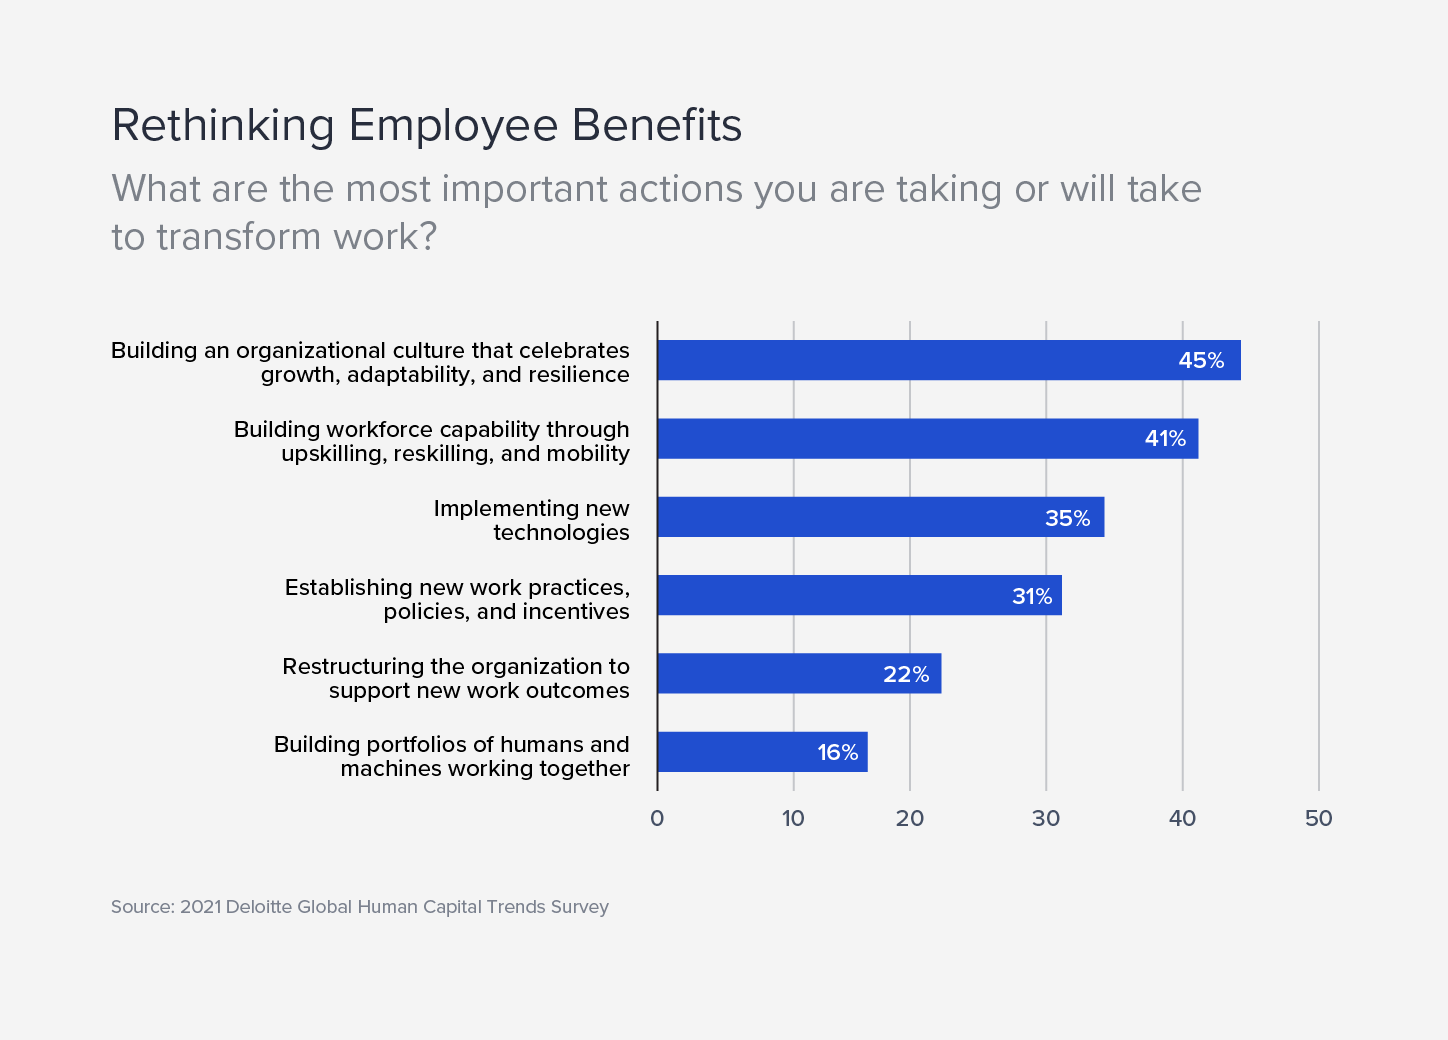 Companies are transforming work by taking actions like upskilling and implementing new technologies.